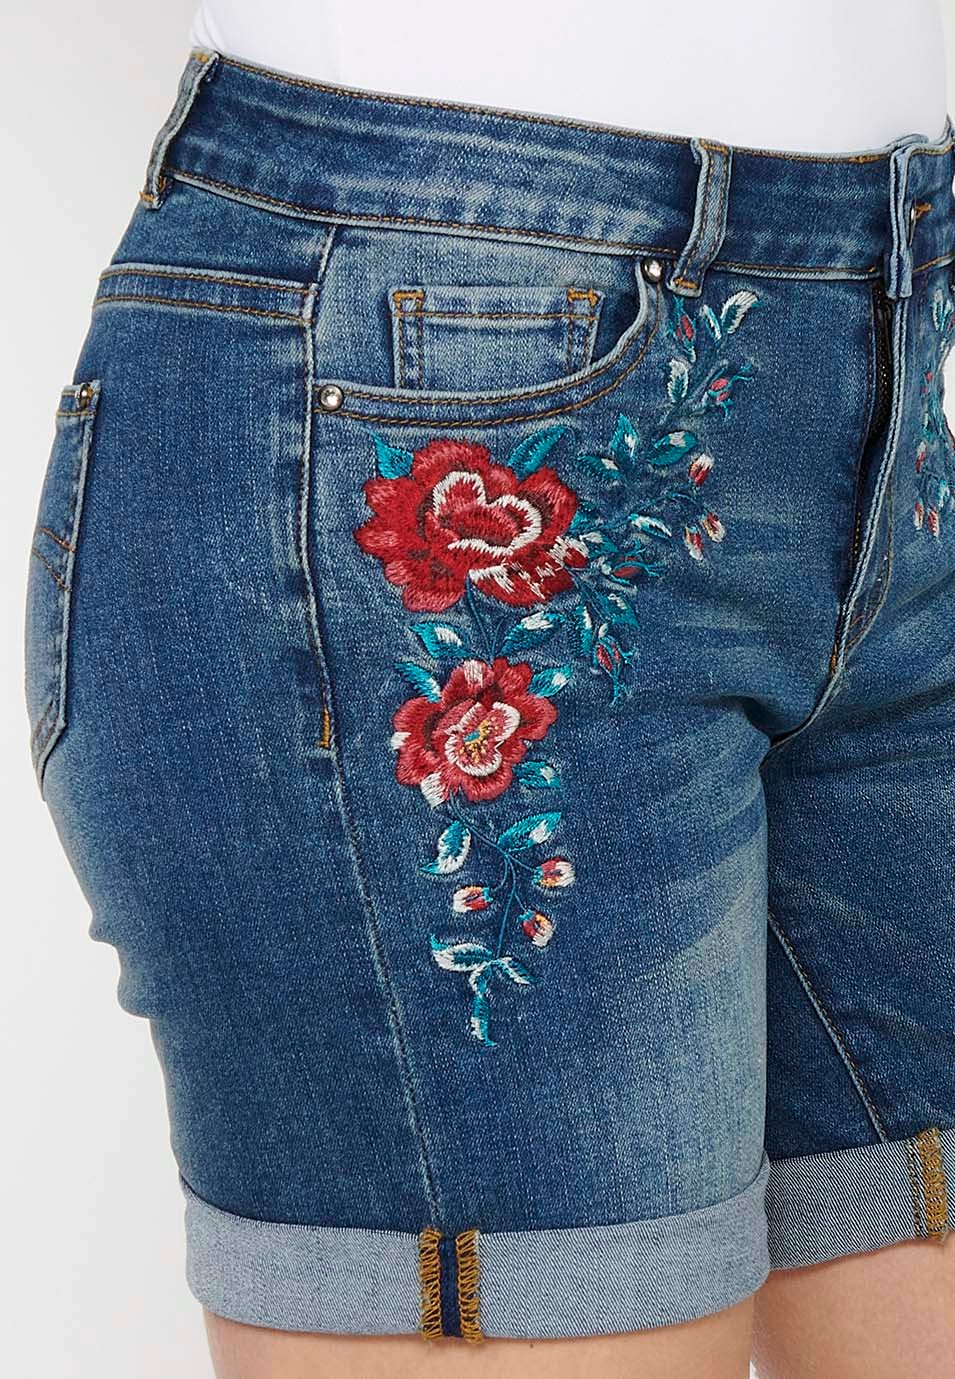 Denim shorts with front zipper and button closure and front floral embroidered details with five pockets, one pocket pocket, Dark Blue for Women 9